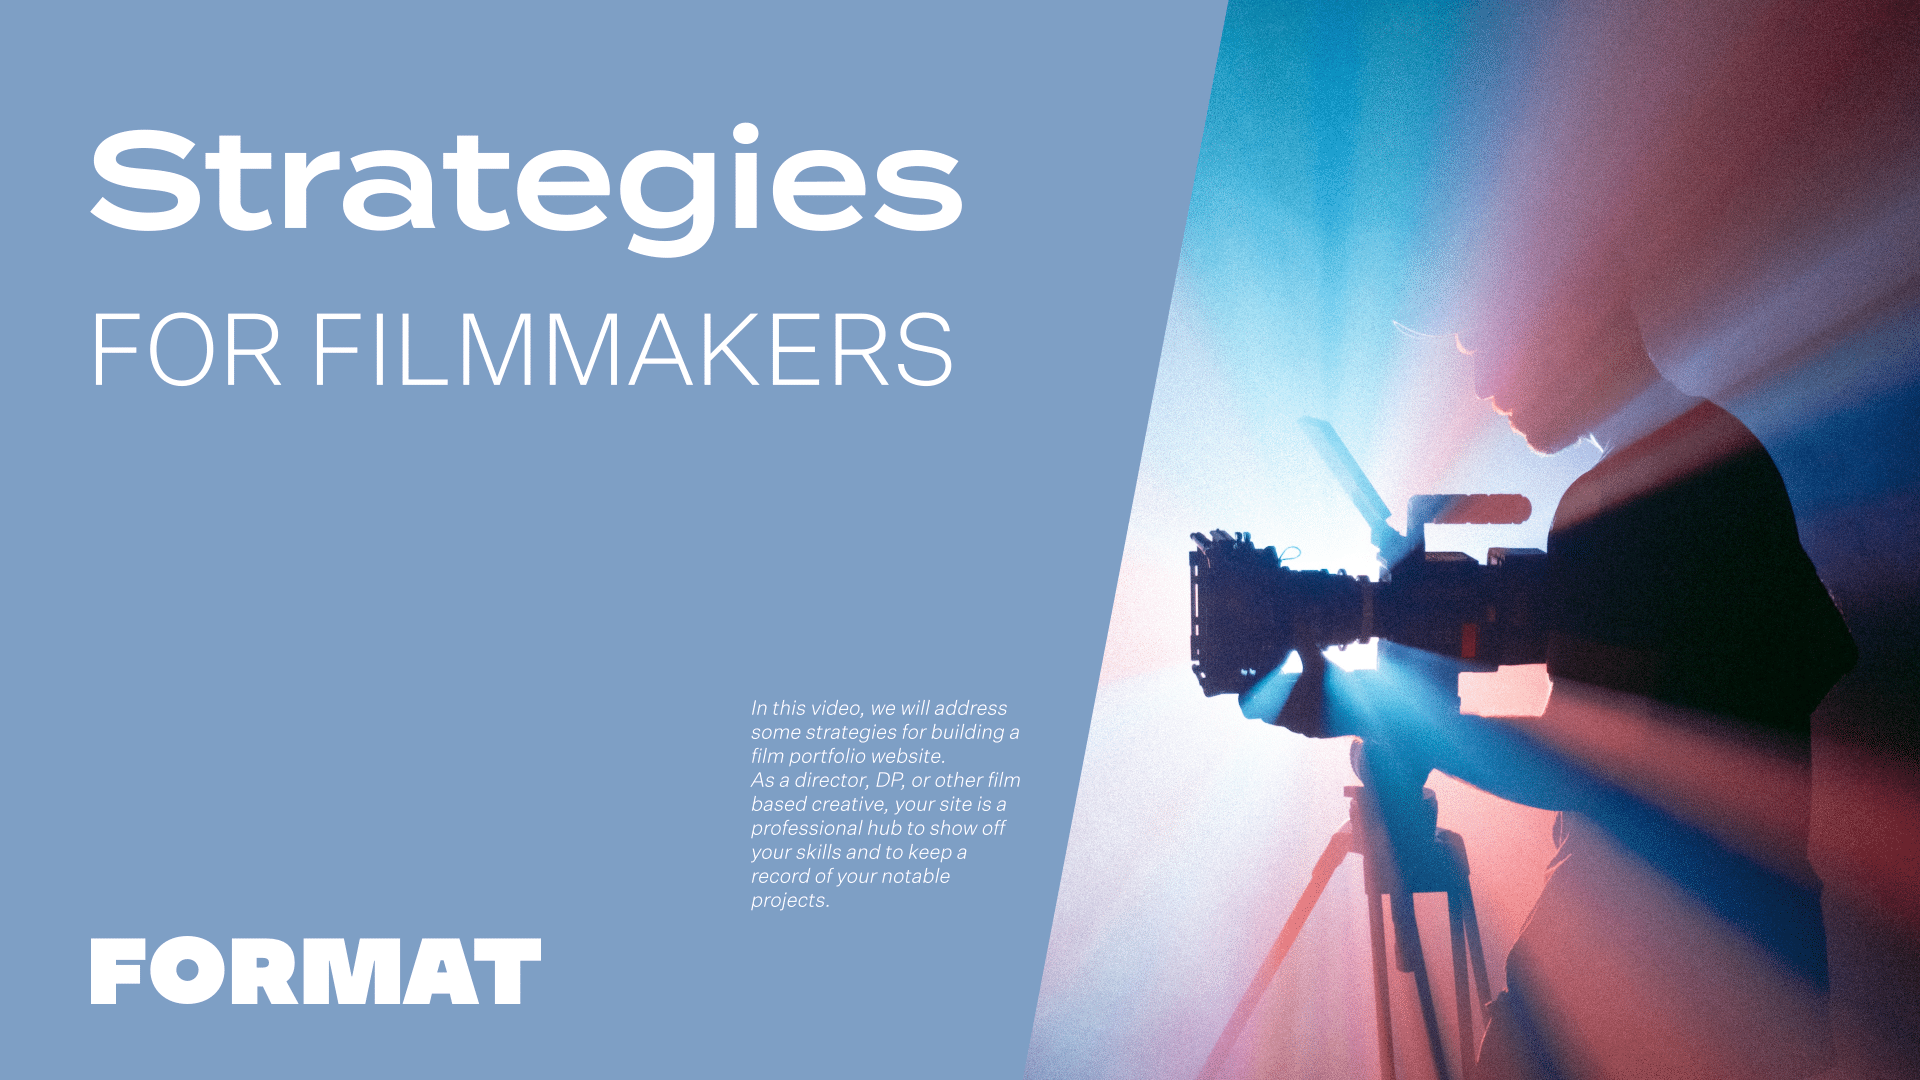 Text in image reads "Strategies for Filmmakers" and shows a video camera